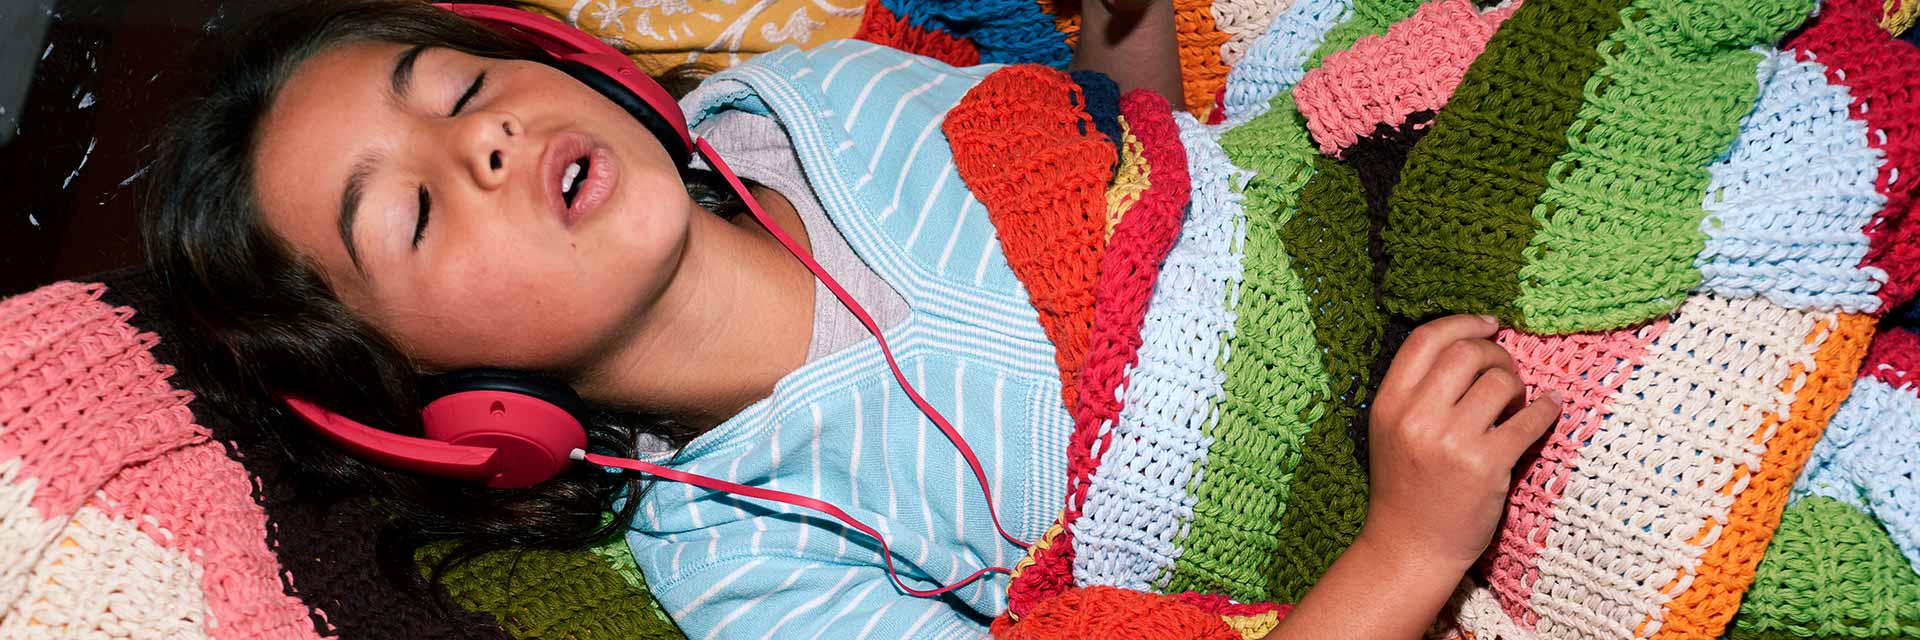 A young girl listens to music through headphones while snuggling with a blanket.